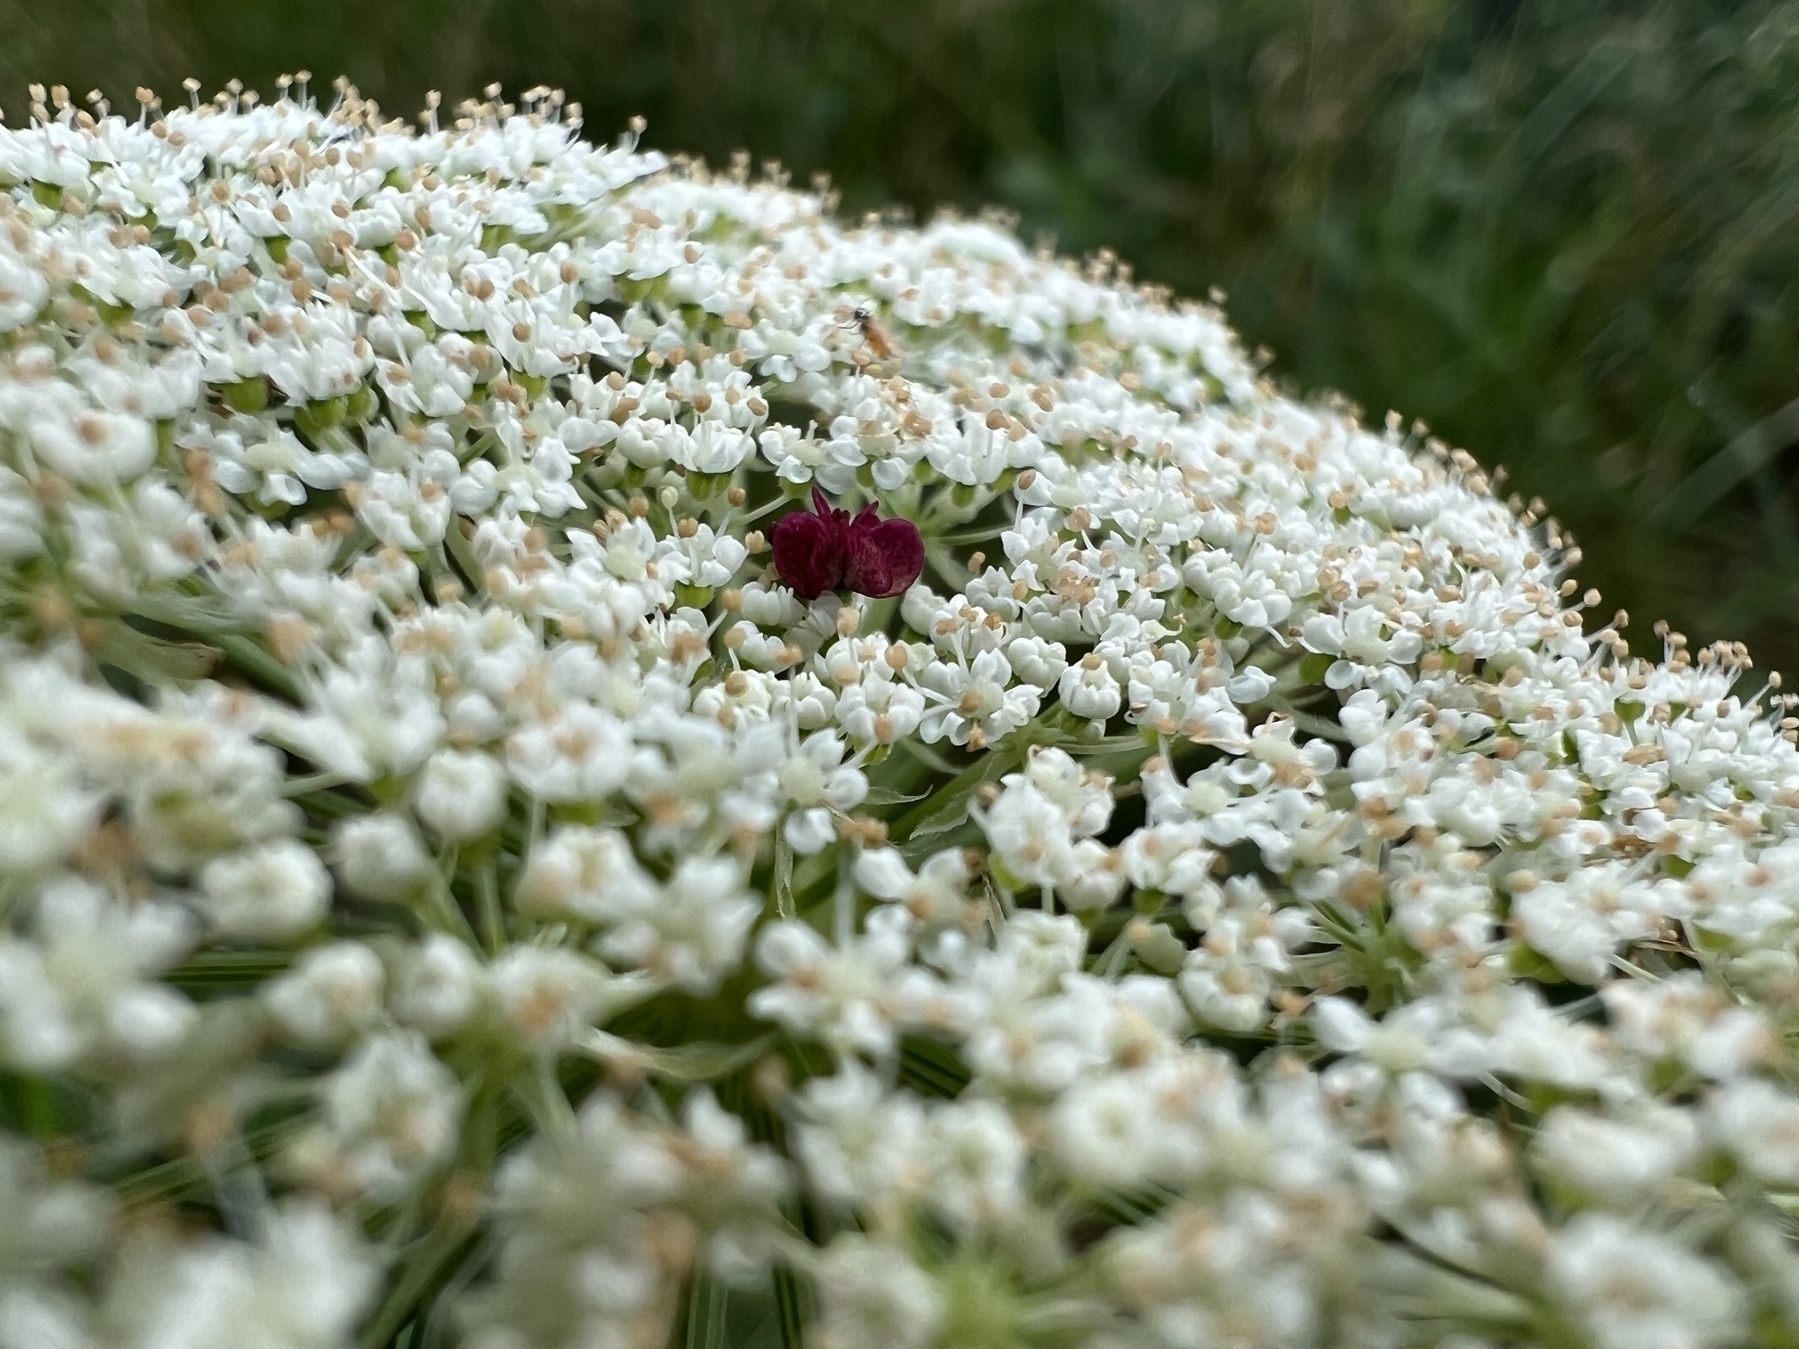 A cluster of very tiny white flowers with a deep red magenta flower at the center